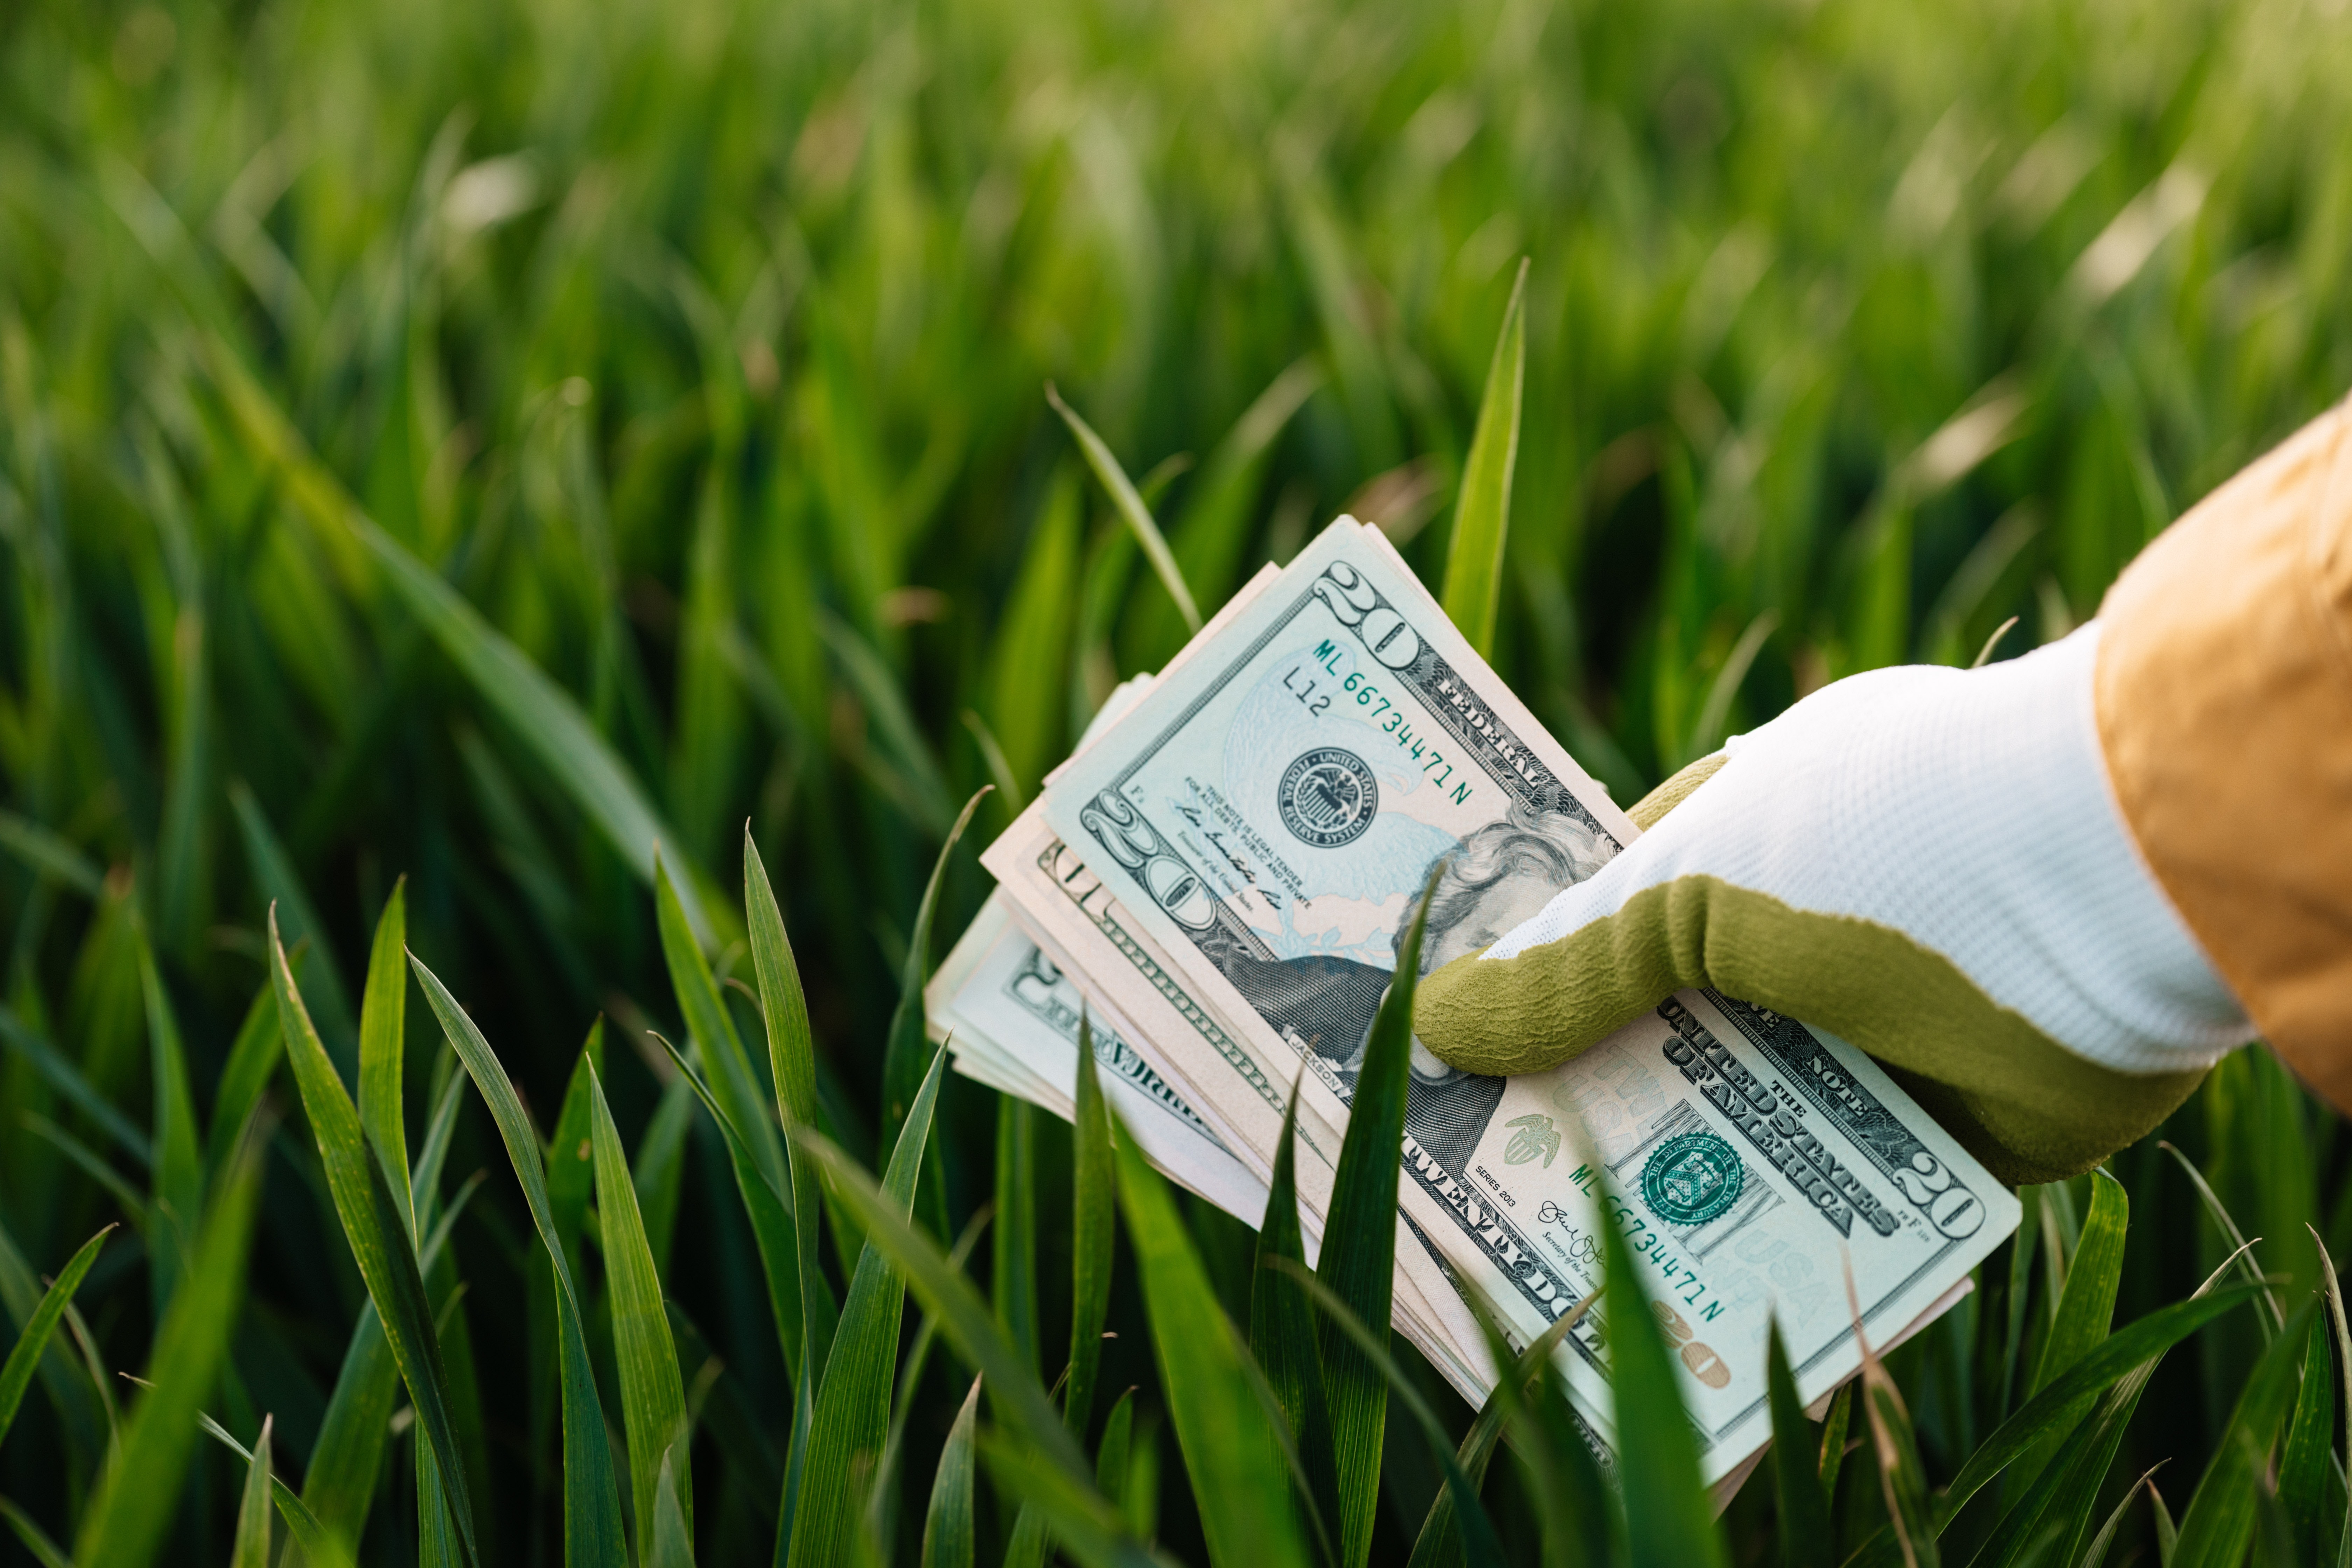 Farmer's hand holding a stack of dollars in a cover crop field to show the profit that can be found organic farming